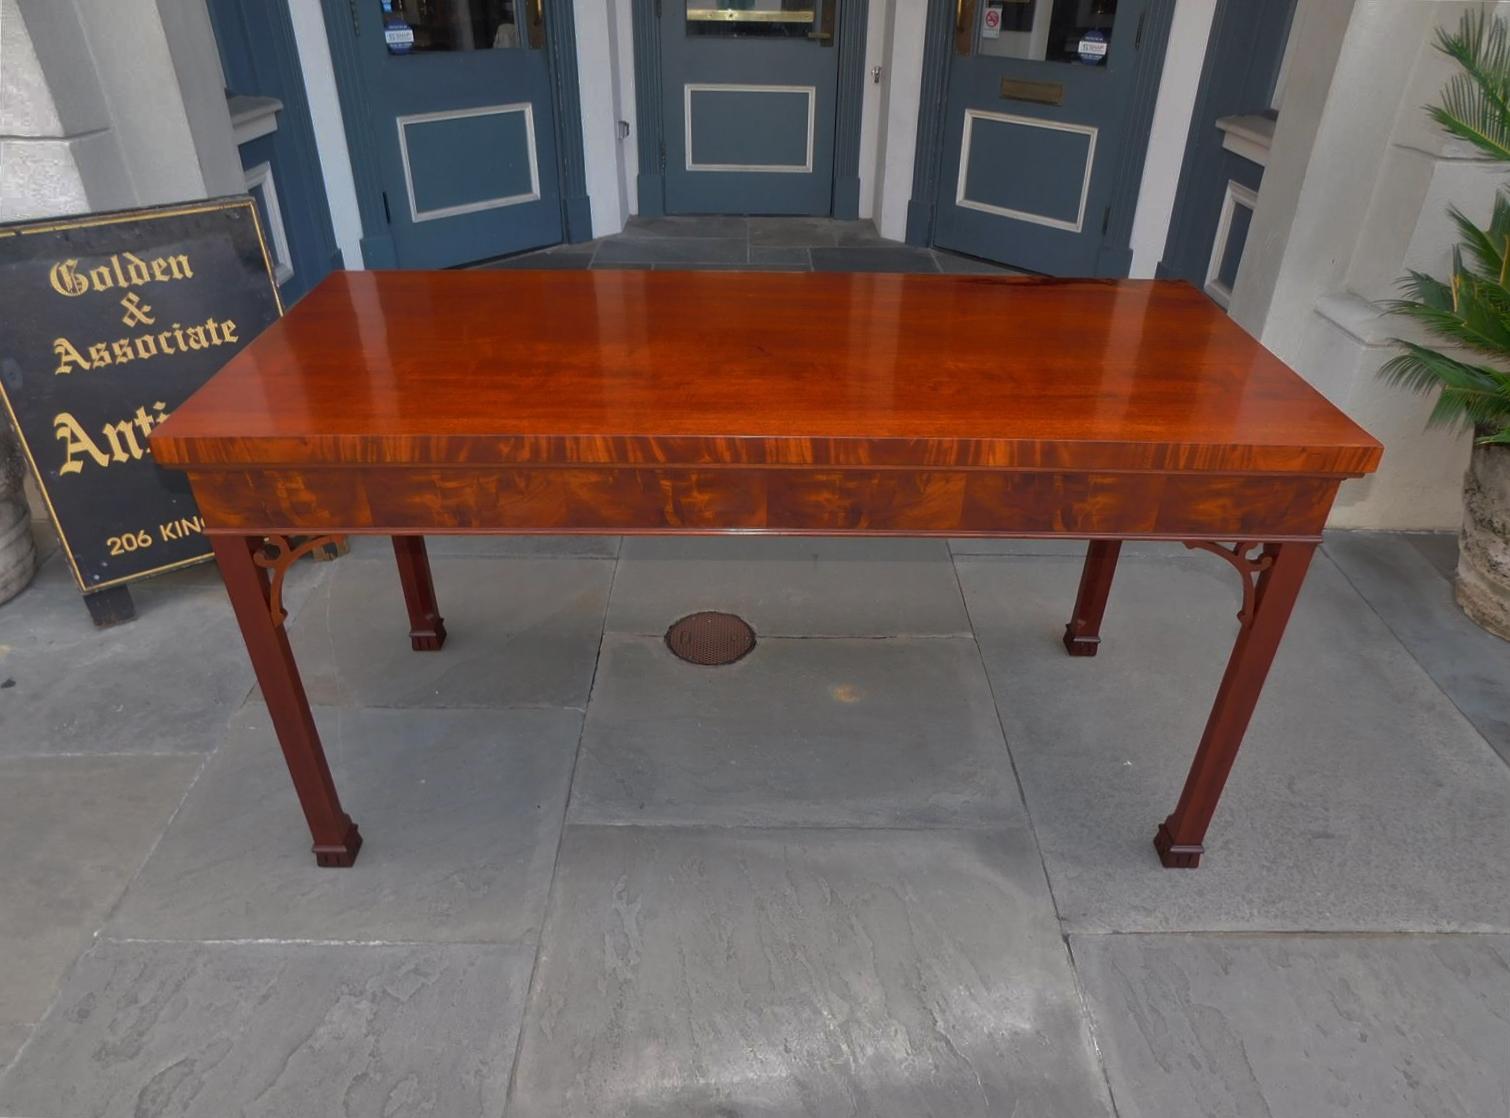 English Chippendale Mahogany console table with a carved molded edge one board top, flanking corner fret works, and resting on the original chamfered legs with Marlborough feet, late 18th century